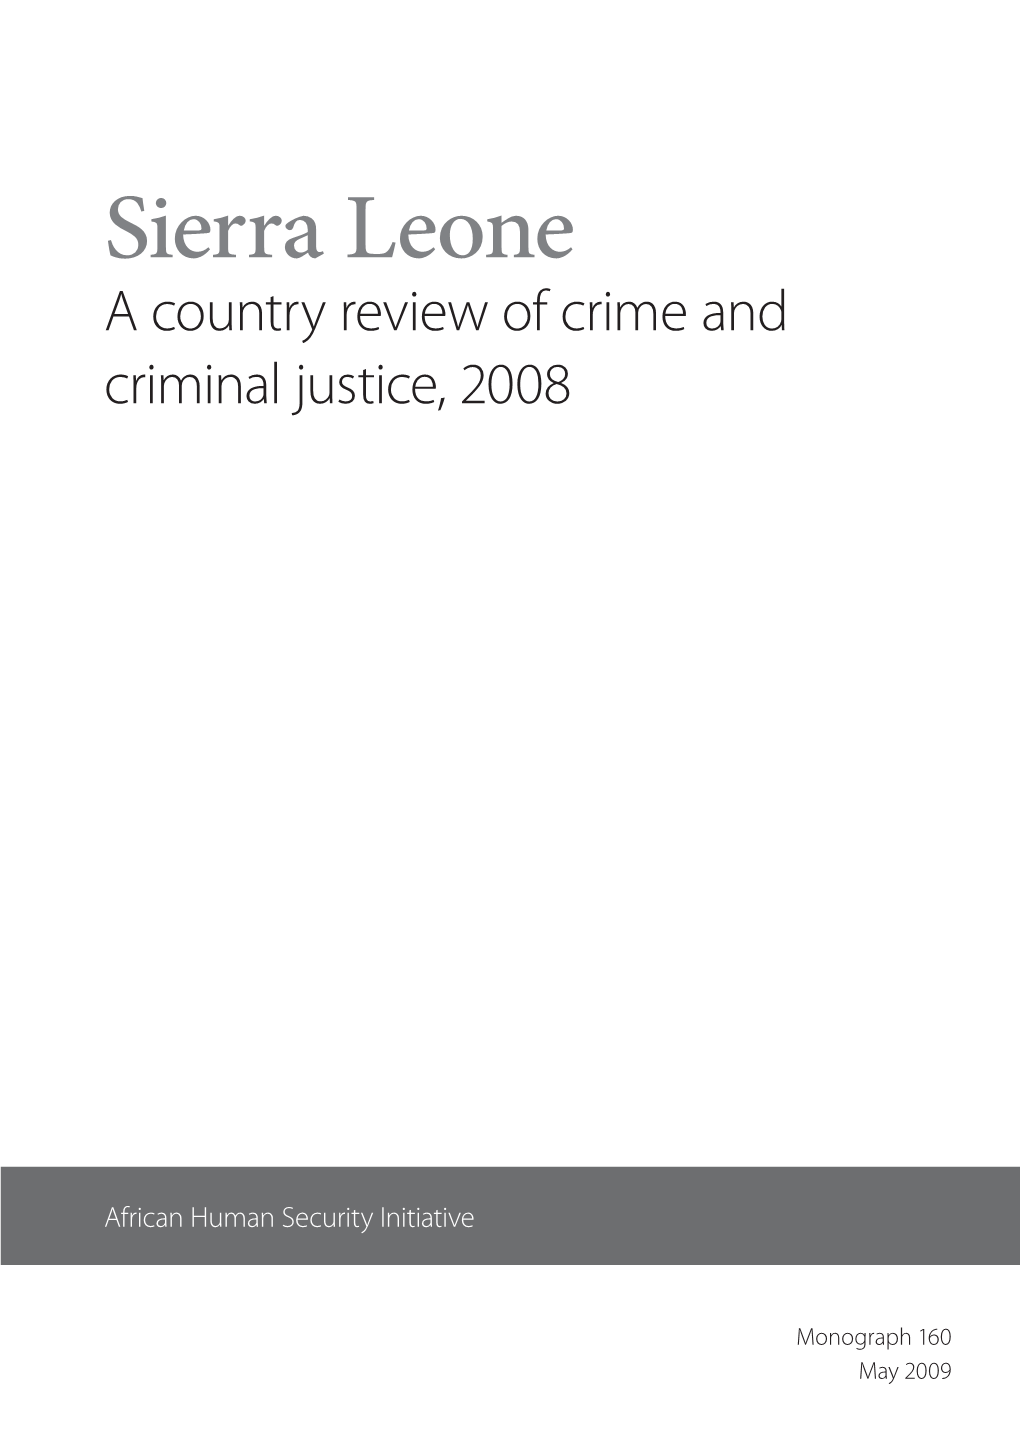 Sierra Leone a Country Review of Crime and Criminal Justice, 2008